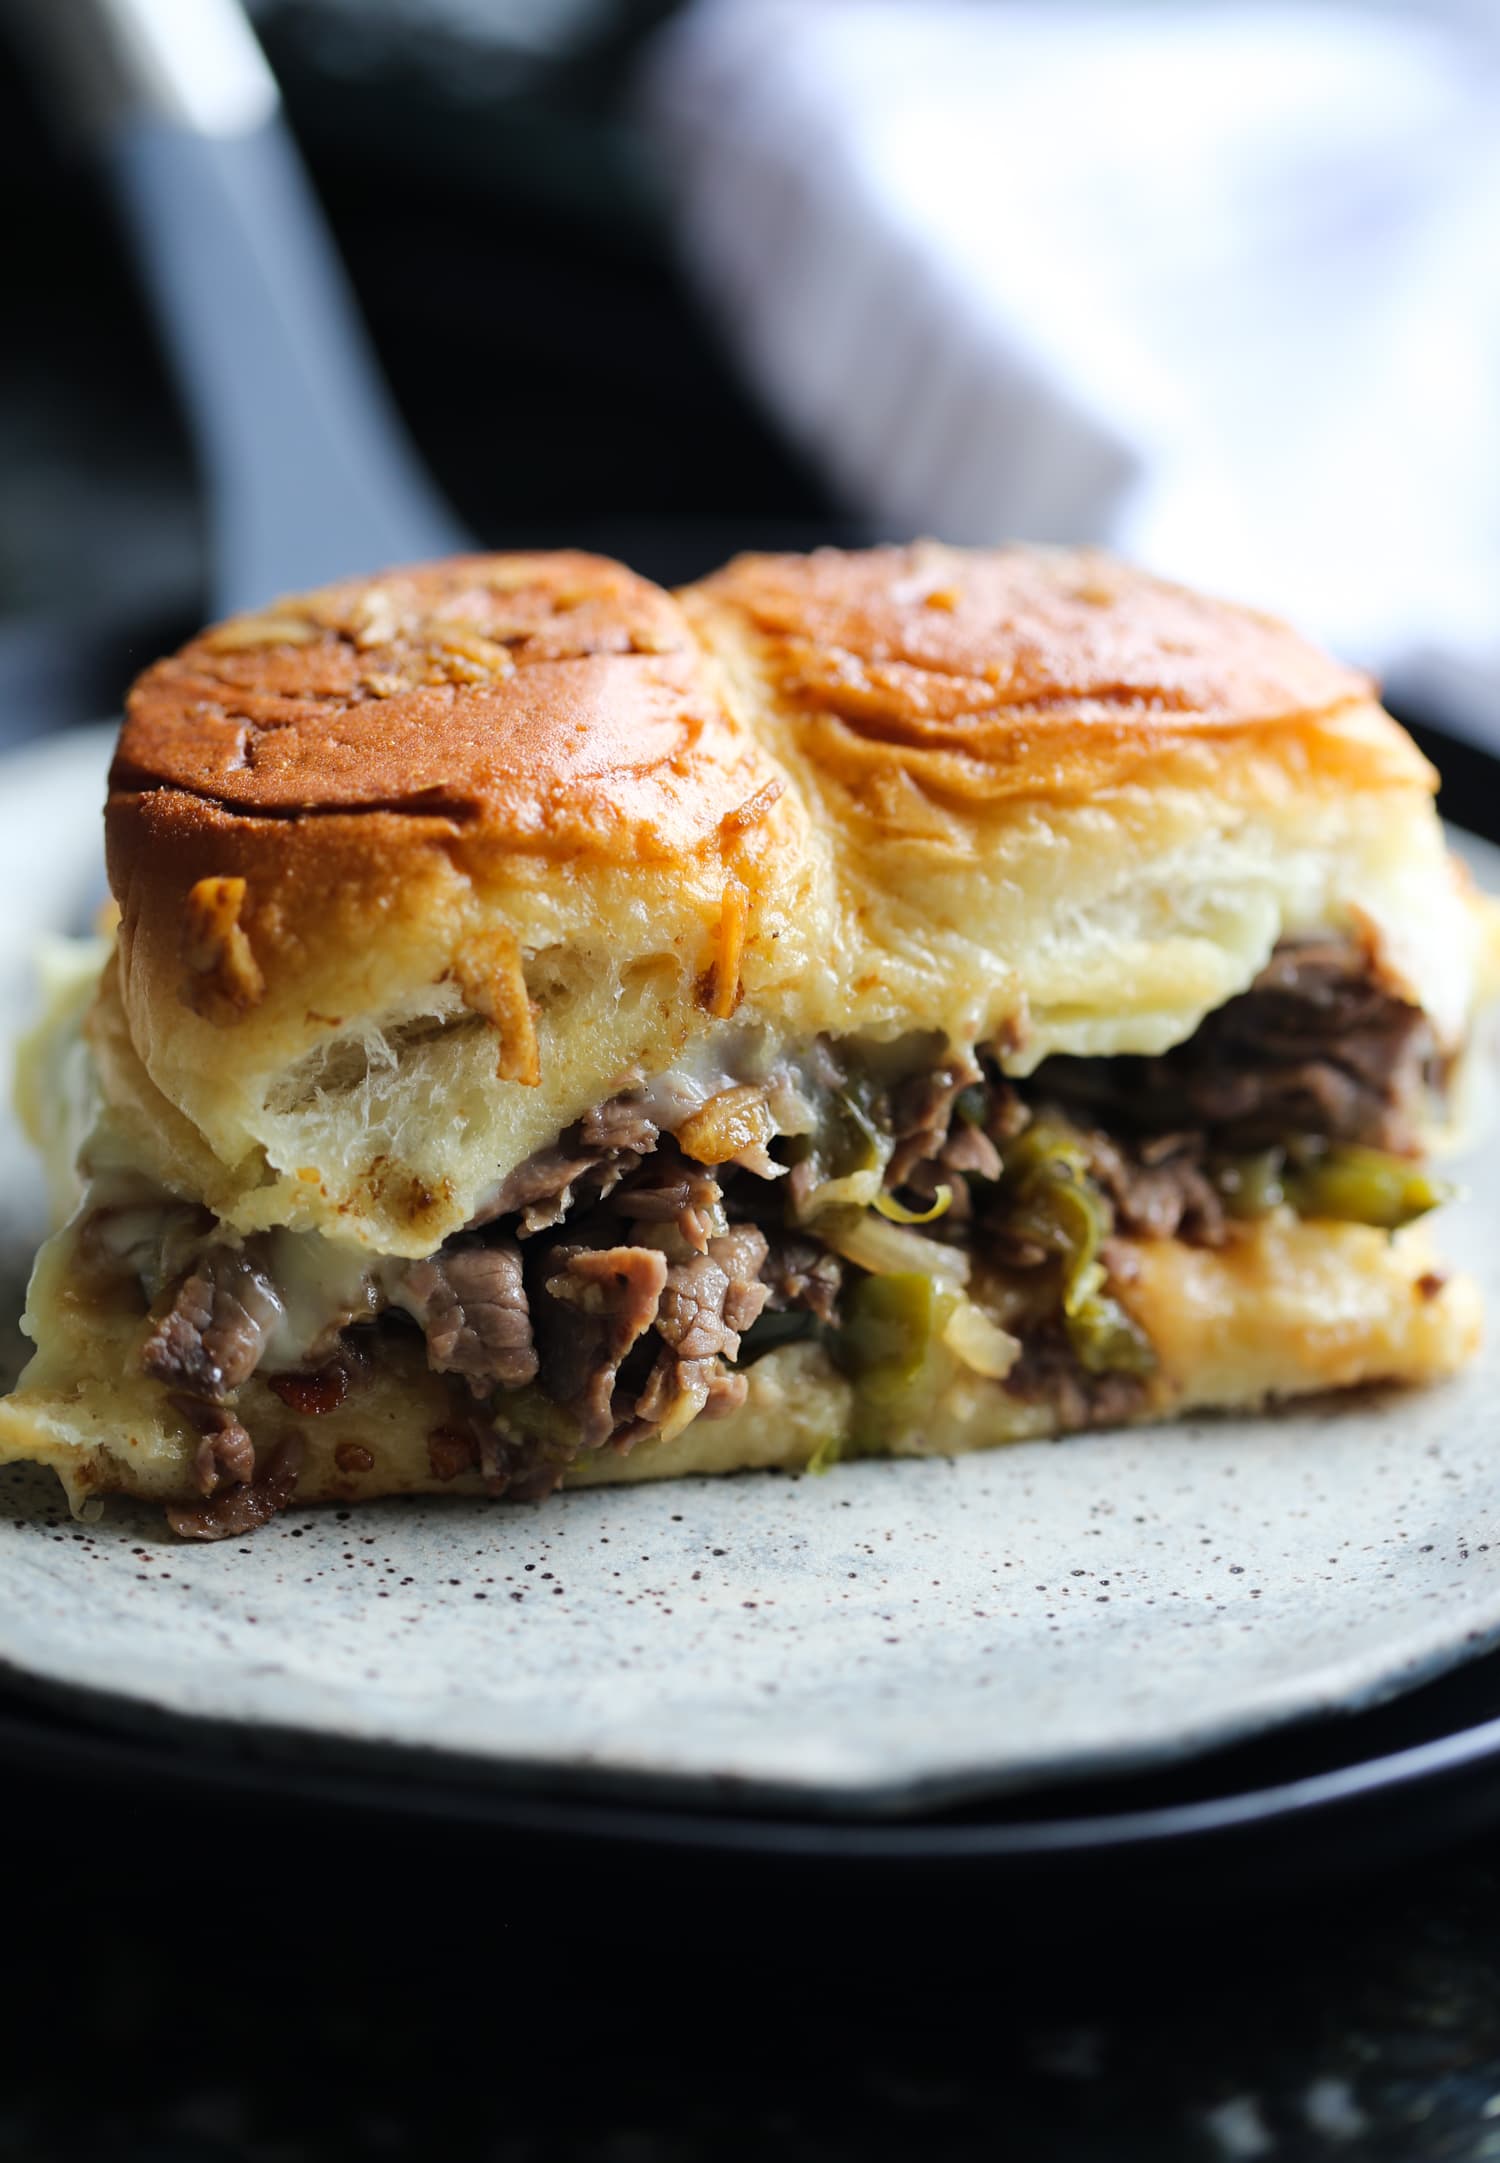 Two Philly cheesesteak sliders on a plate.